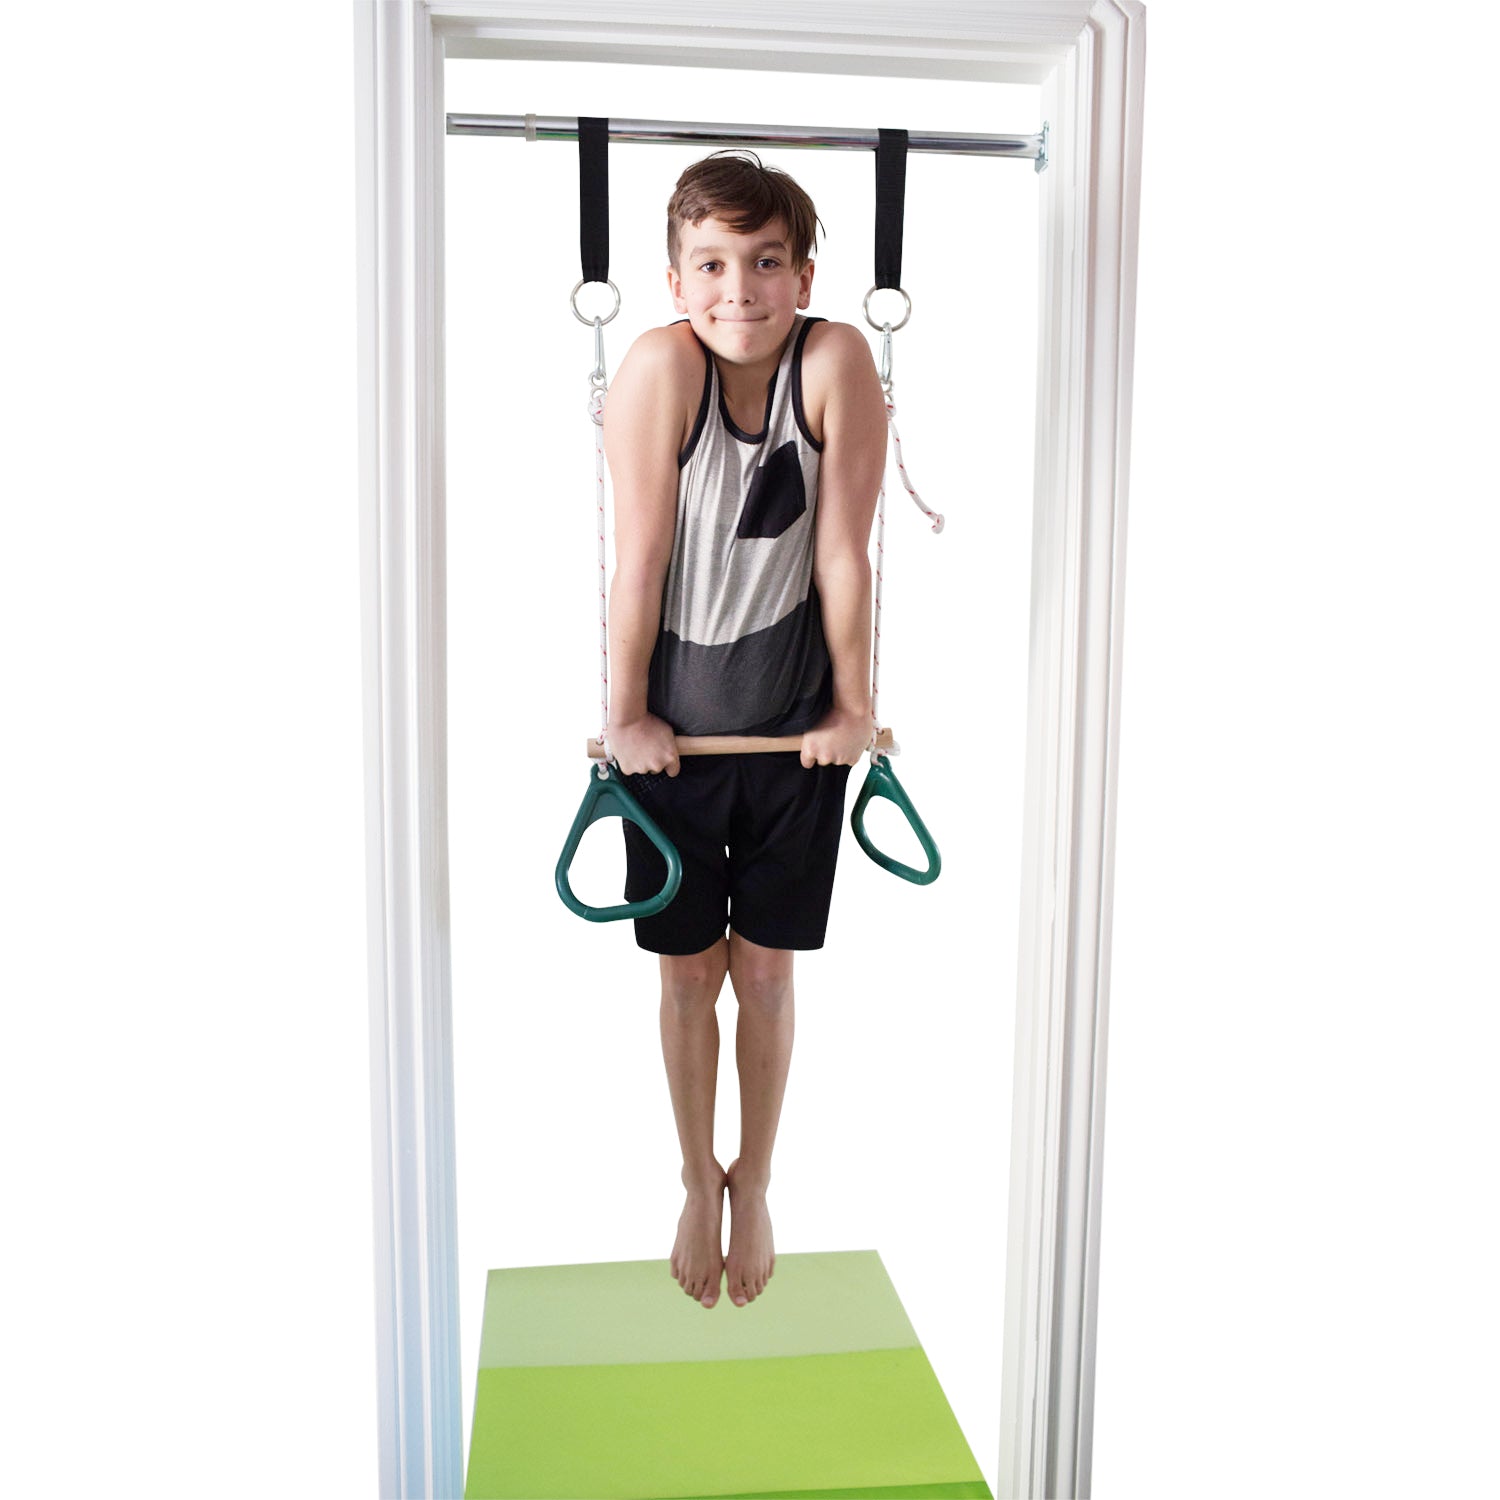 Doorway Trapeze Bar and Gym Rings Combo - Green - DreamGYM